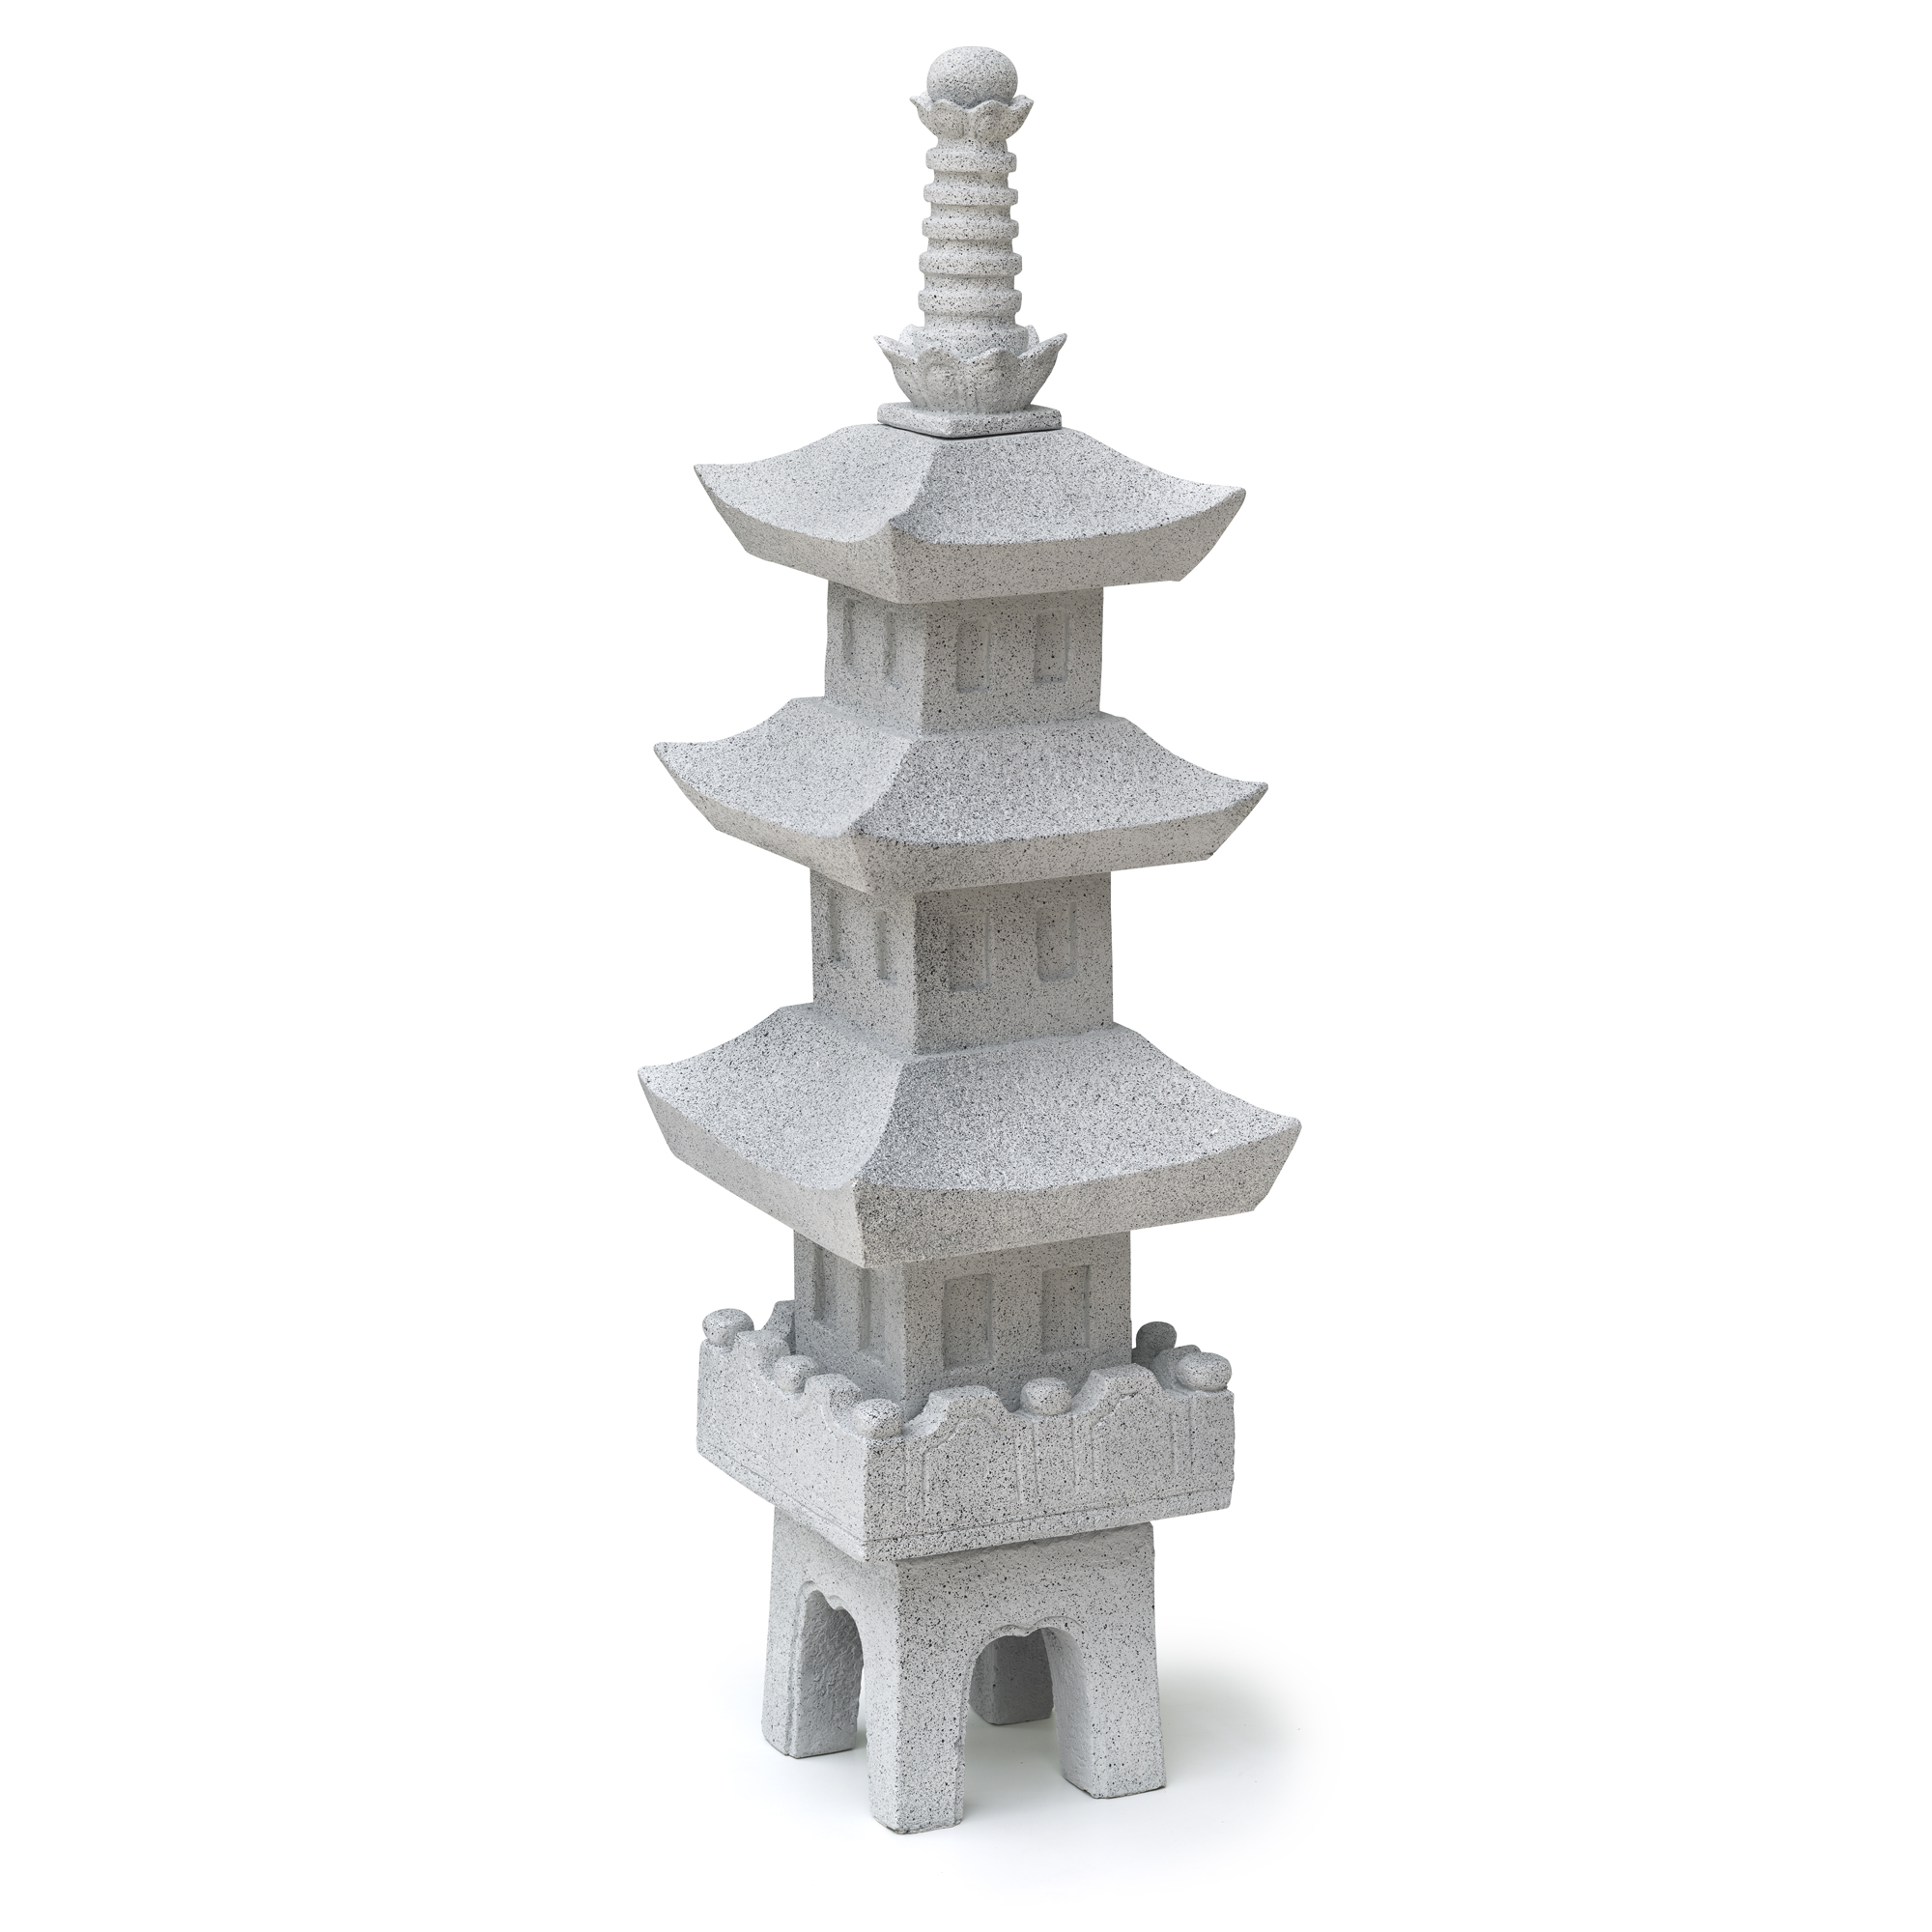 Ubbink Pagode Giapponese decorativa